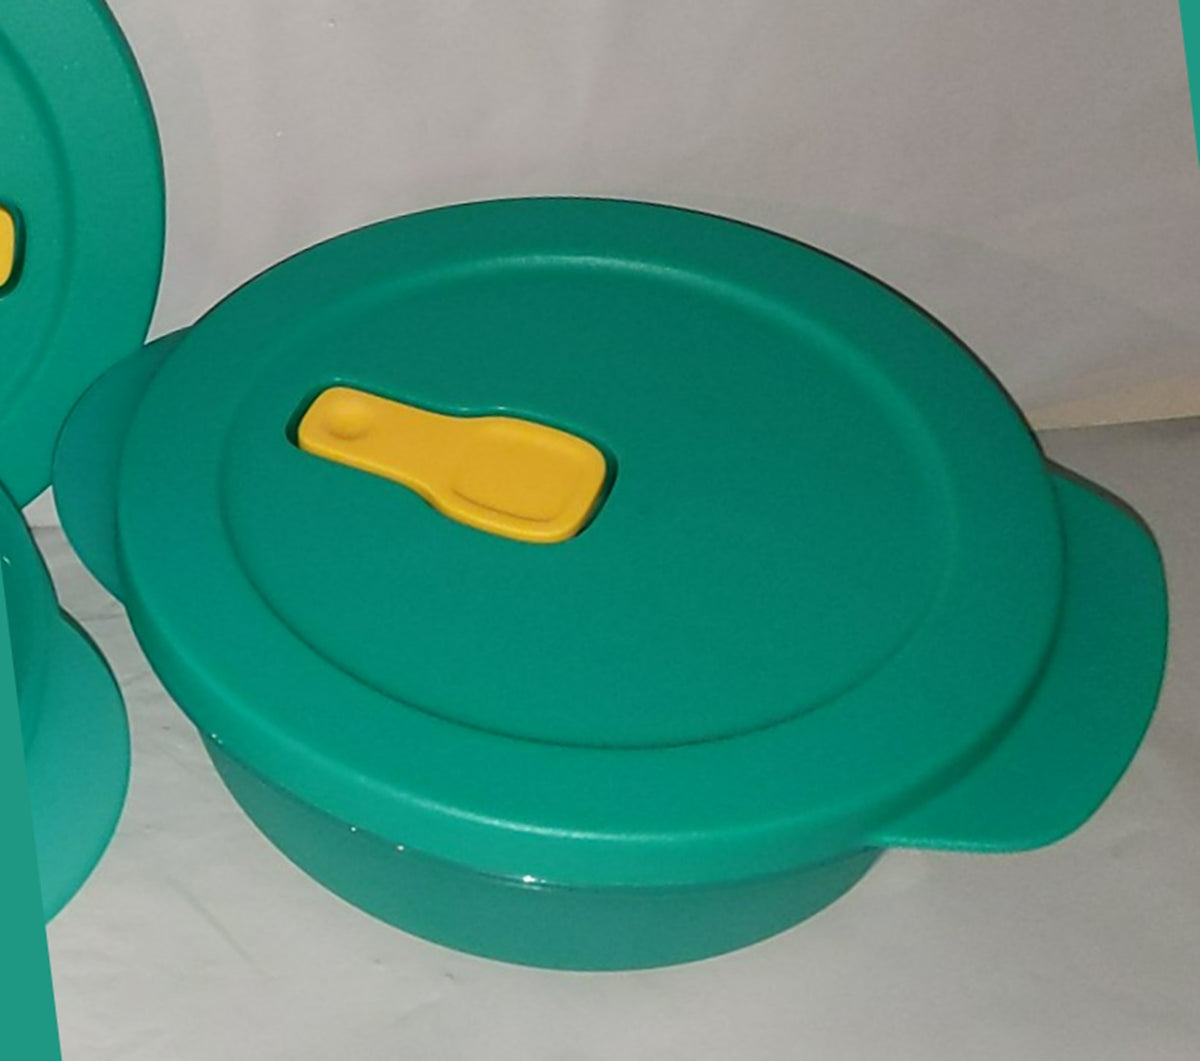 Large Tupperware Crystalwave Bowls with Seals (2) - household